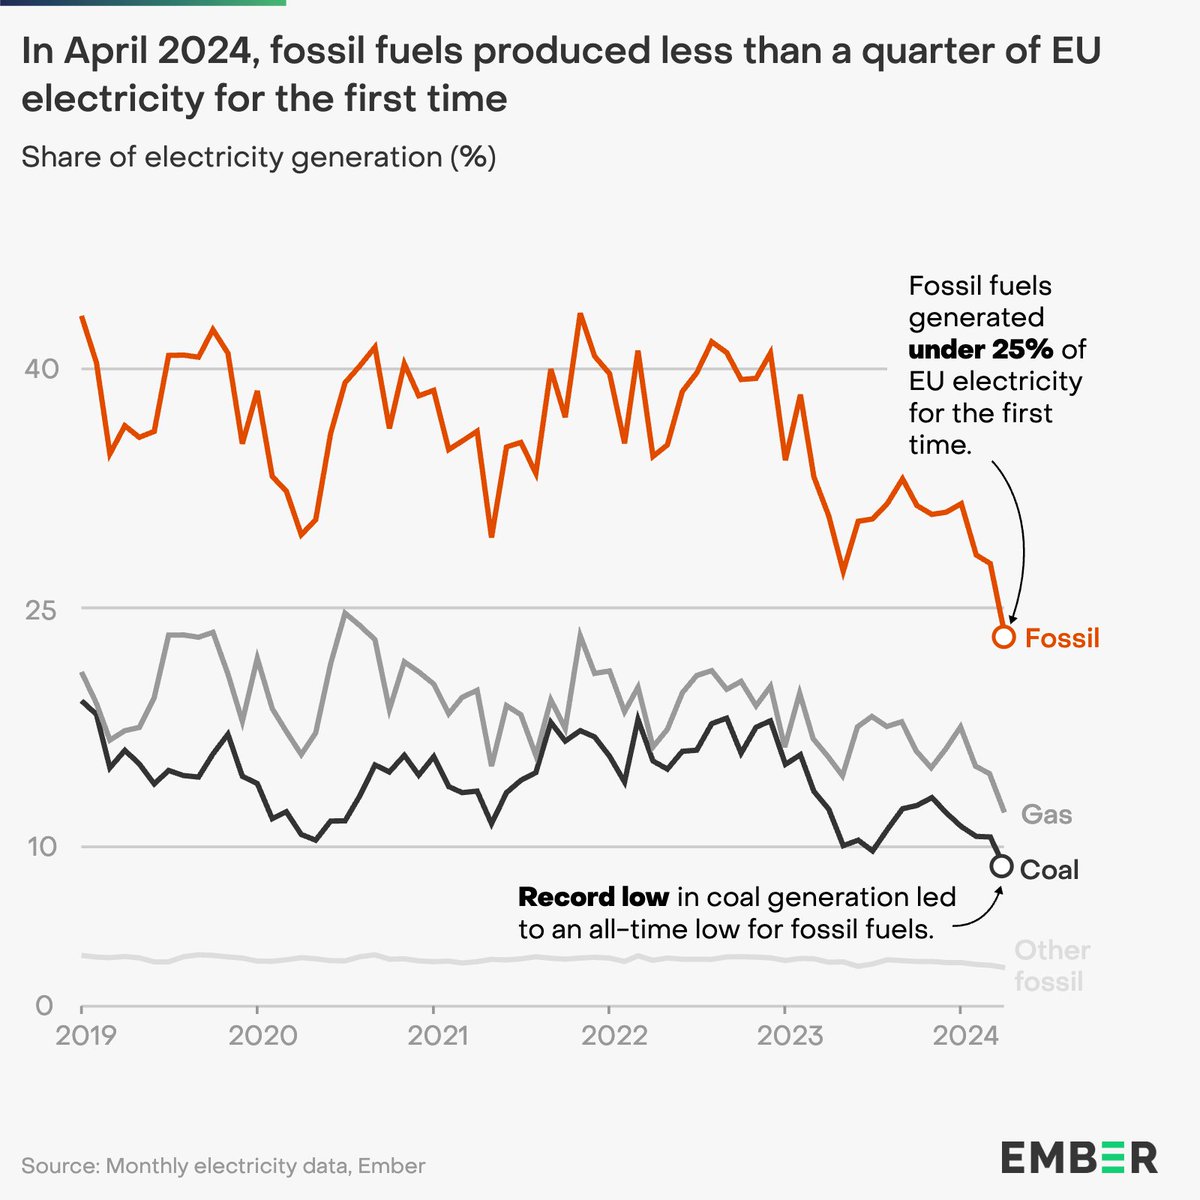 MILESTONE | Fossil fuels provided less than a quarter of EU electricity for the first month ever. ember-climate.org/insights/in-br…